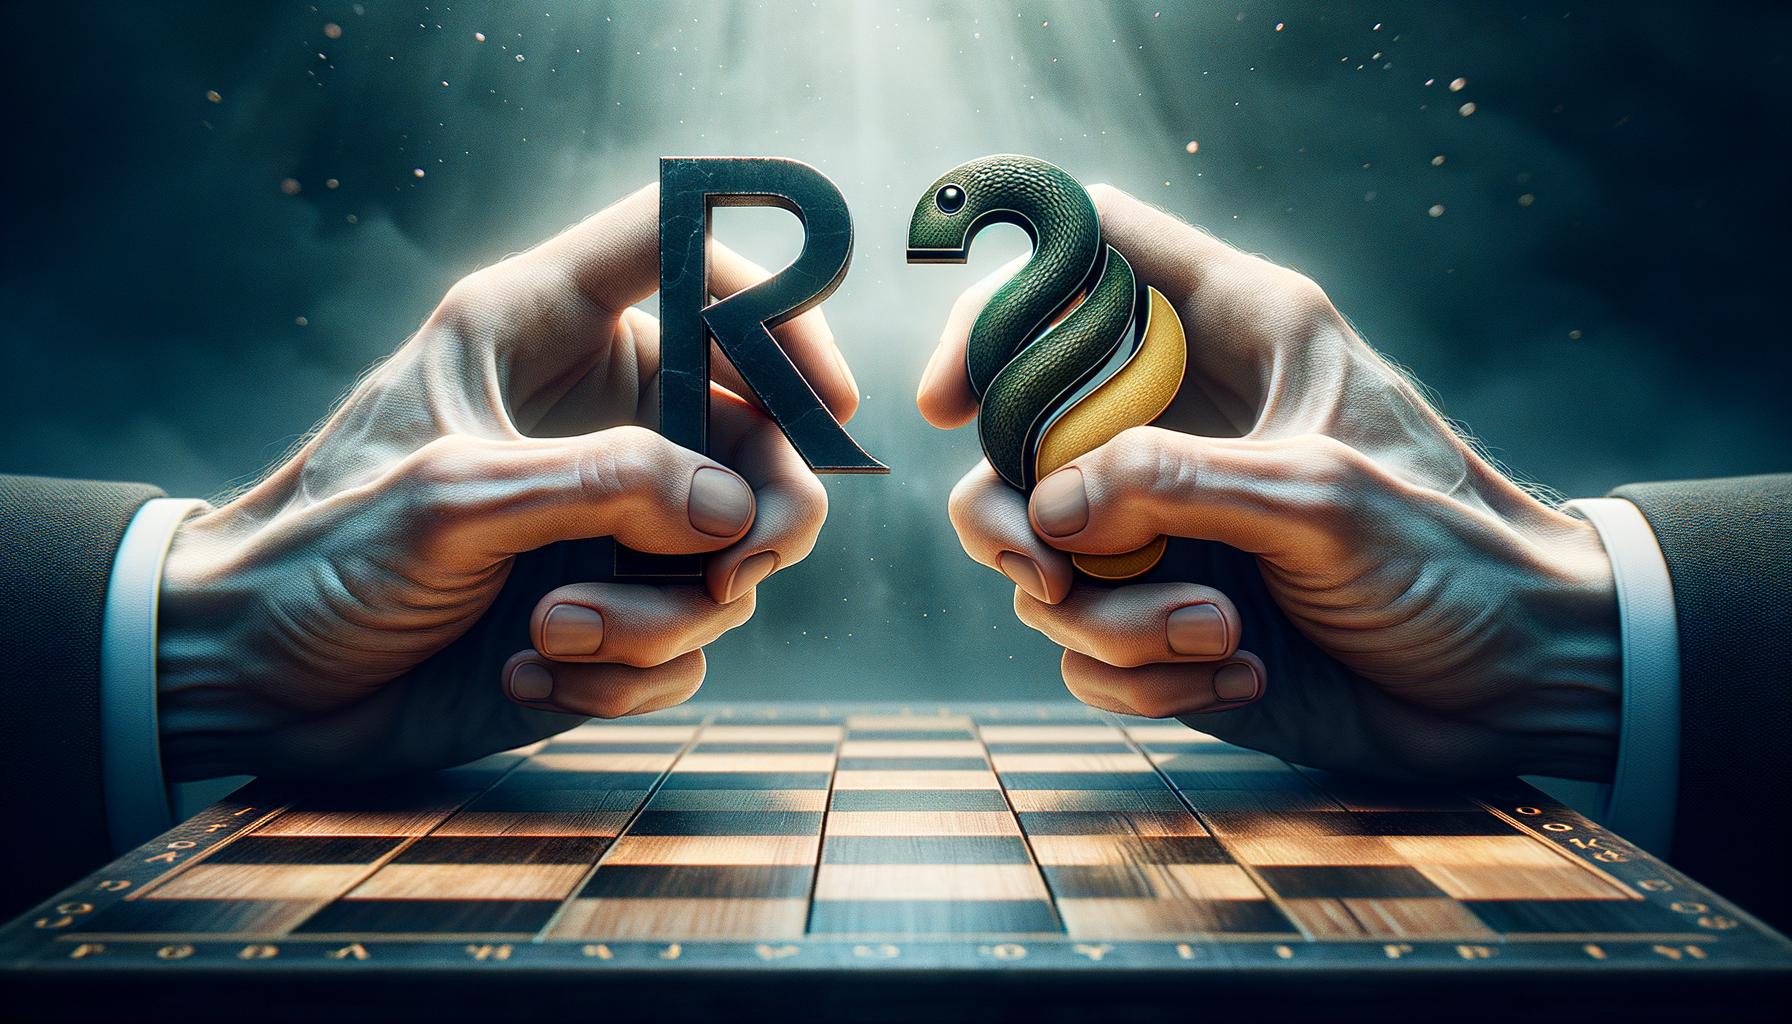 choosing the right tool python or r